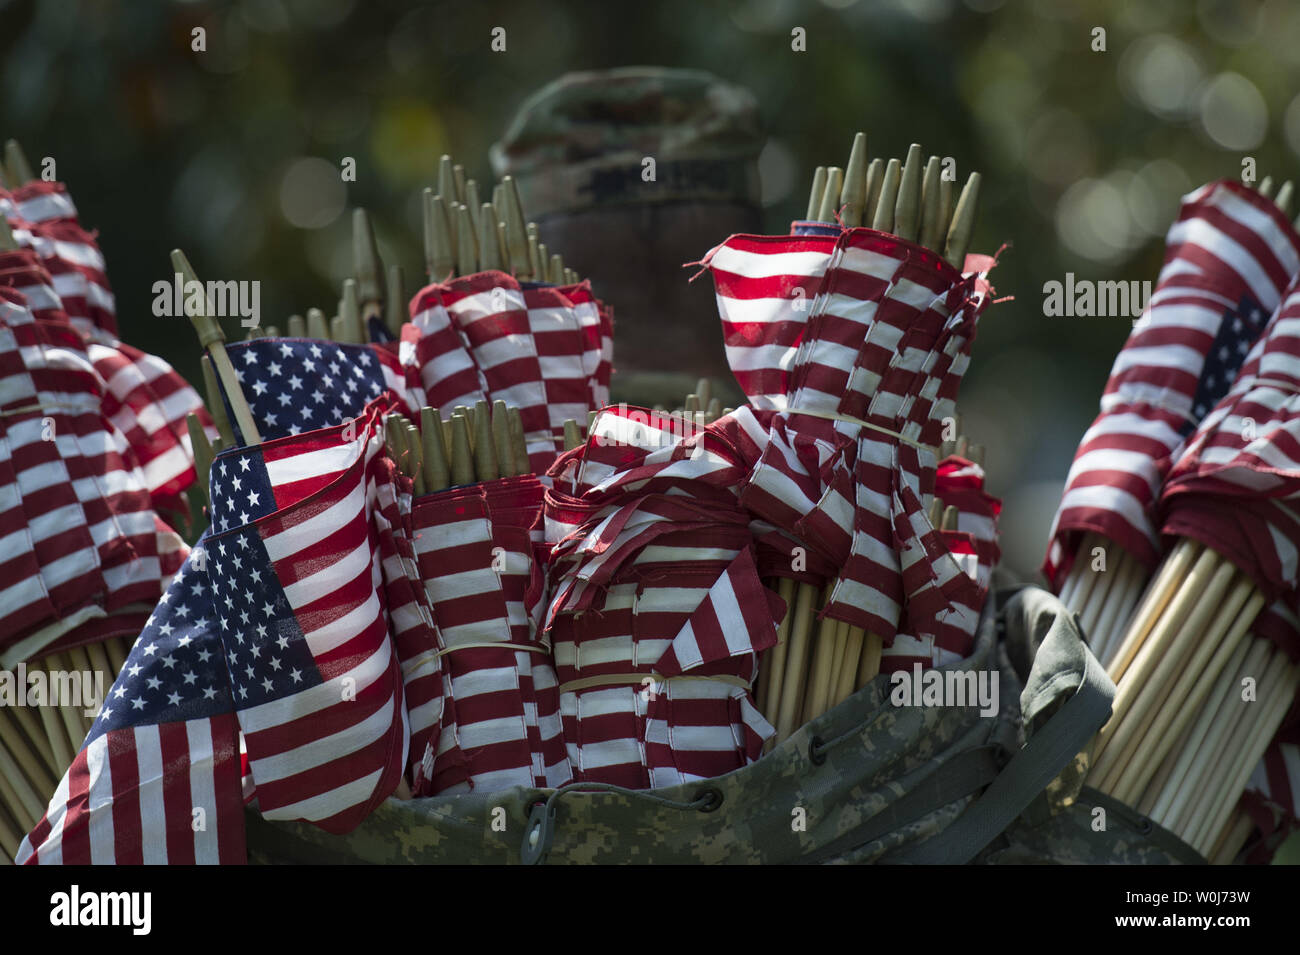 A soldier with the U.S. Army 3rd Infantry Regiment (Old Guard) carries flags during the annual Flags-In event for Memorial Day at Arlington National Cemetery in Arlington, Virginia on May 26, 2016. Members of The Old Guard placed an America flag at more than 230,000 grave markers at Arlington in honor of of Nation's fallen military members. The tradition has been conducted since 1948. Photo by Kevin Dietsch/UPI Stock Photo